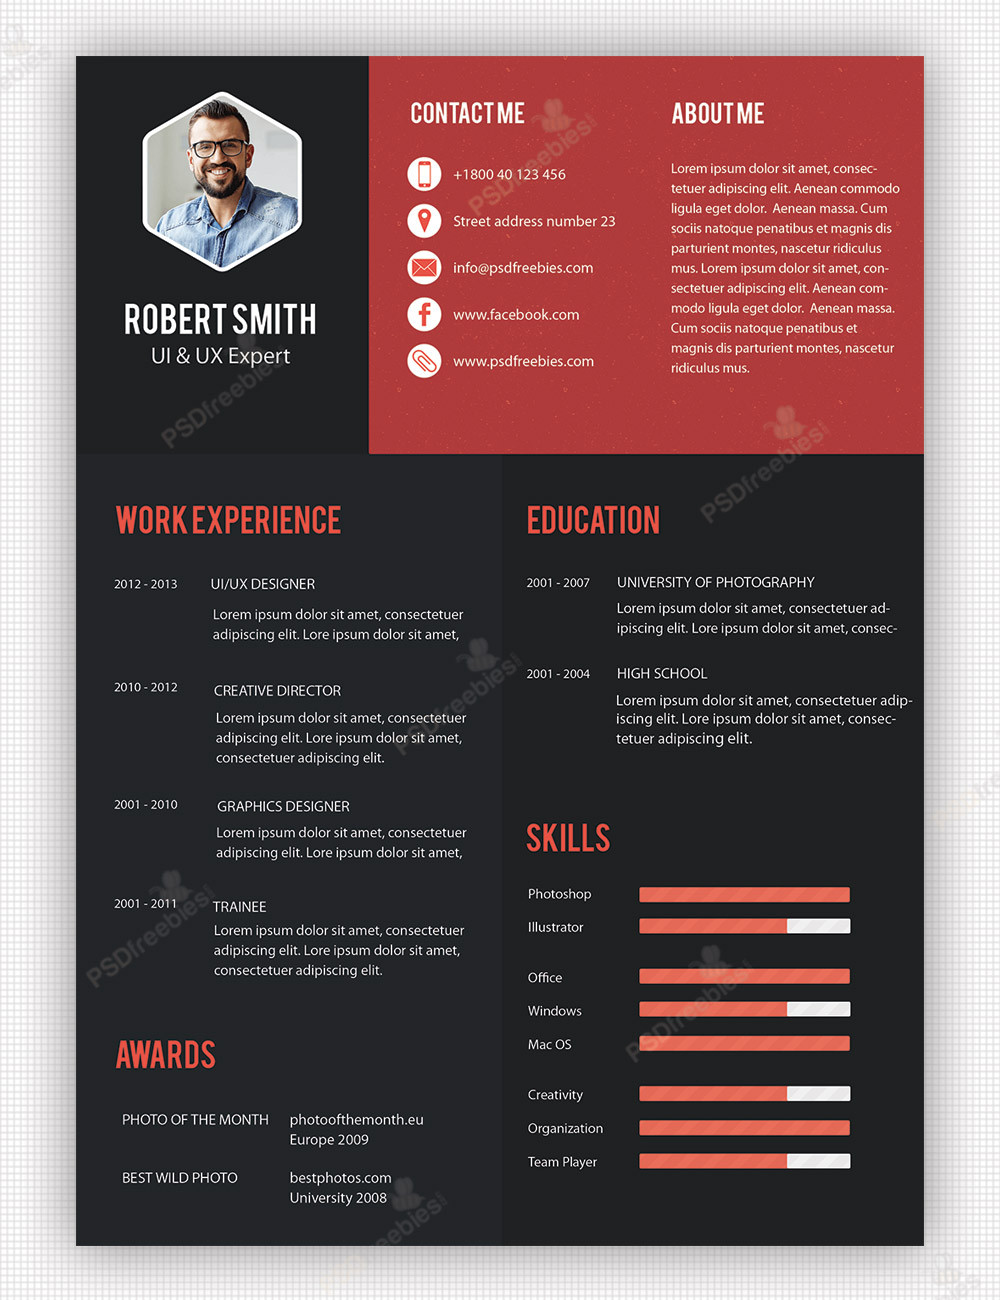 Creative Resume Templates for Graphic Designer Free Download Creative Professional Resume Template Free Psd â Psdfreebies.com